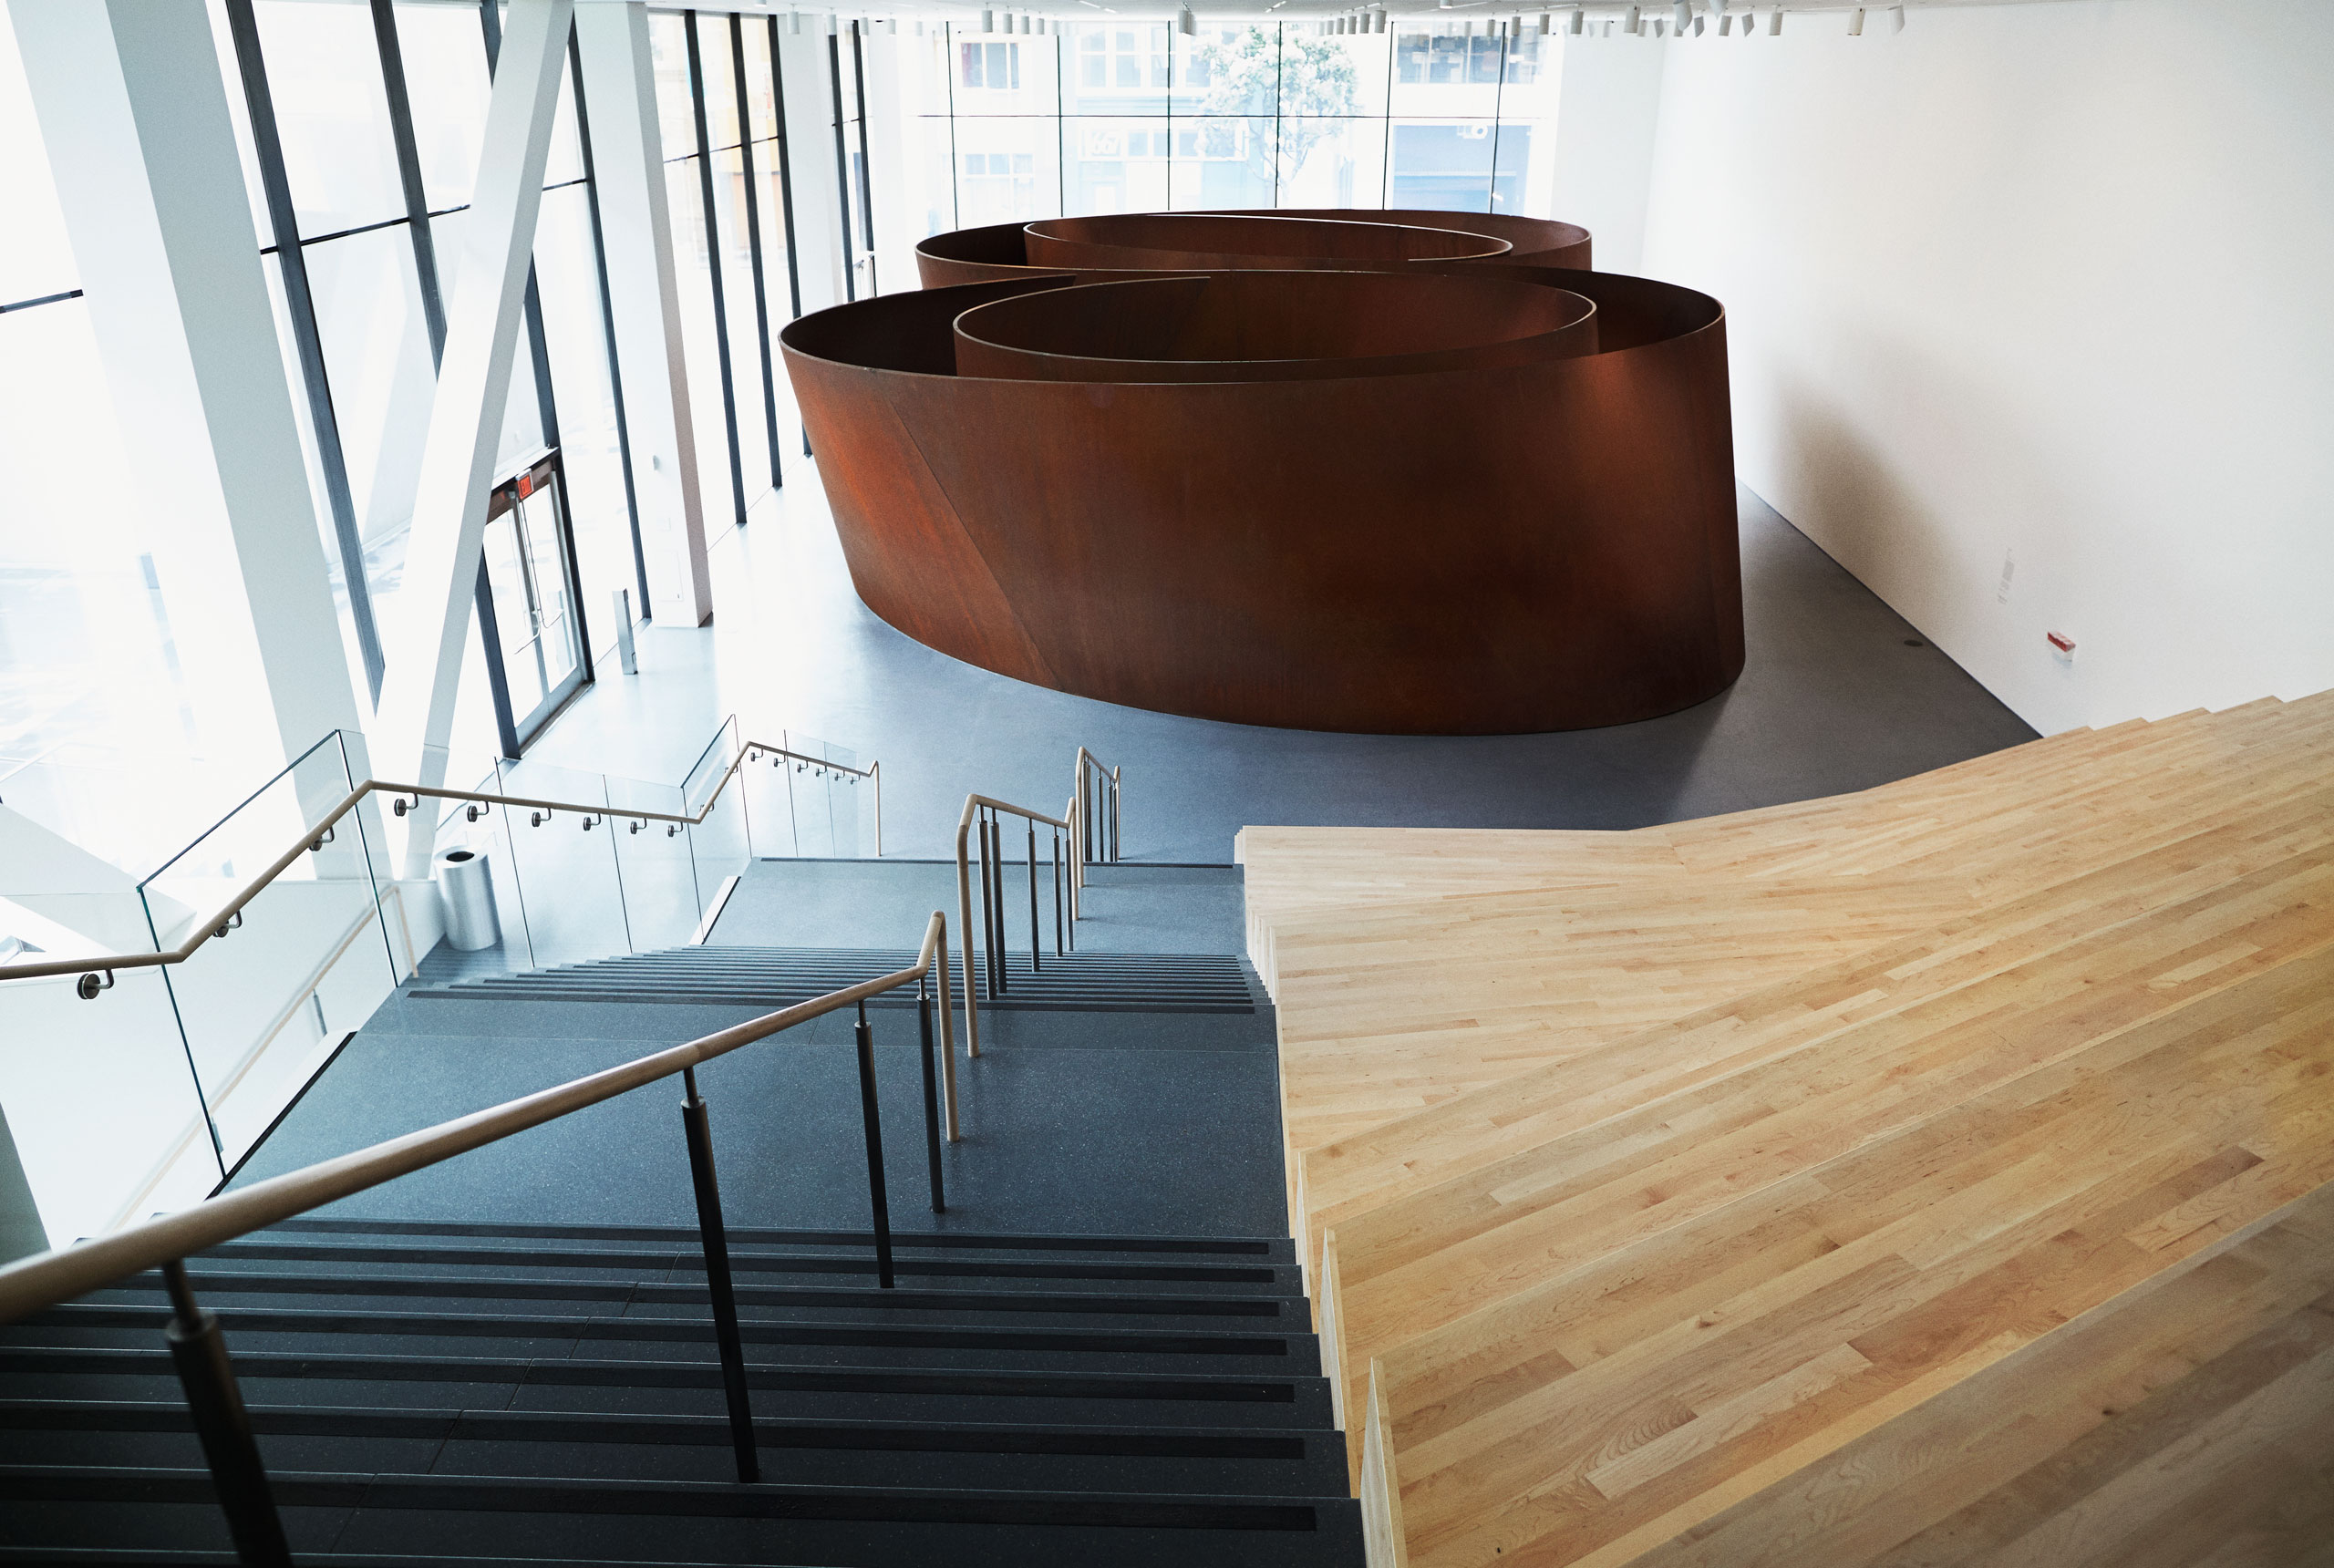 The Snøhetta addition gives Richard Serra’s Sequence, 2006, a room to itself (Cody Pickens for TIME)